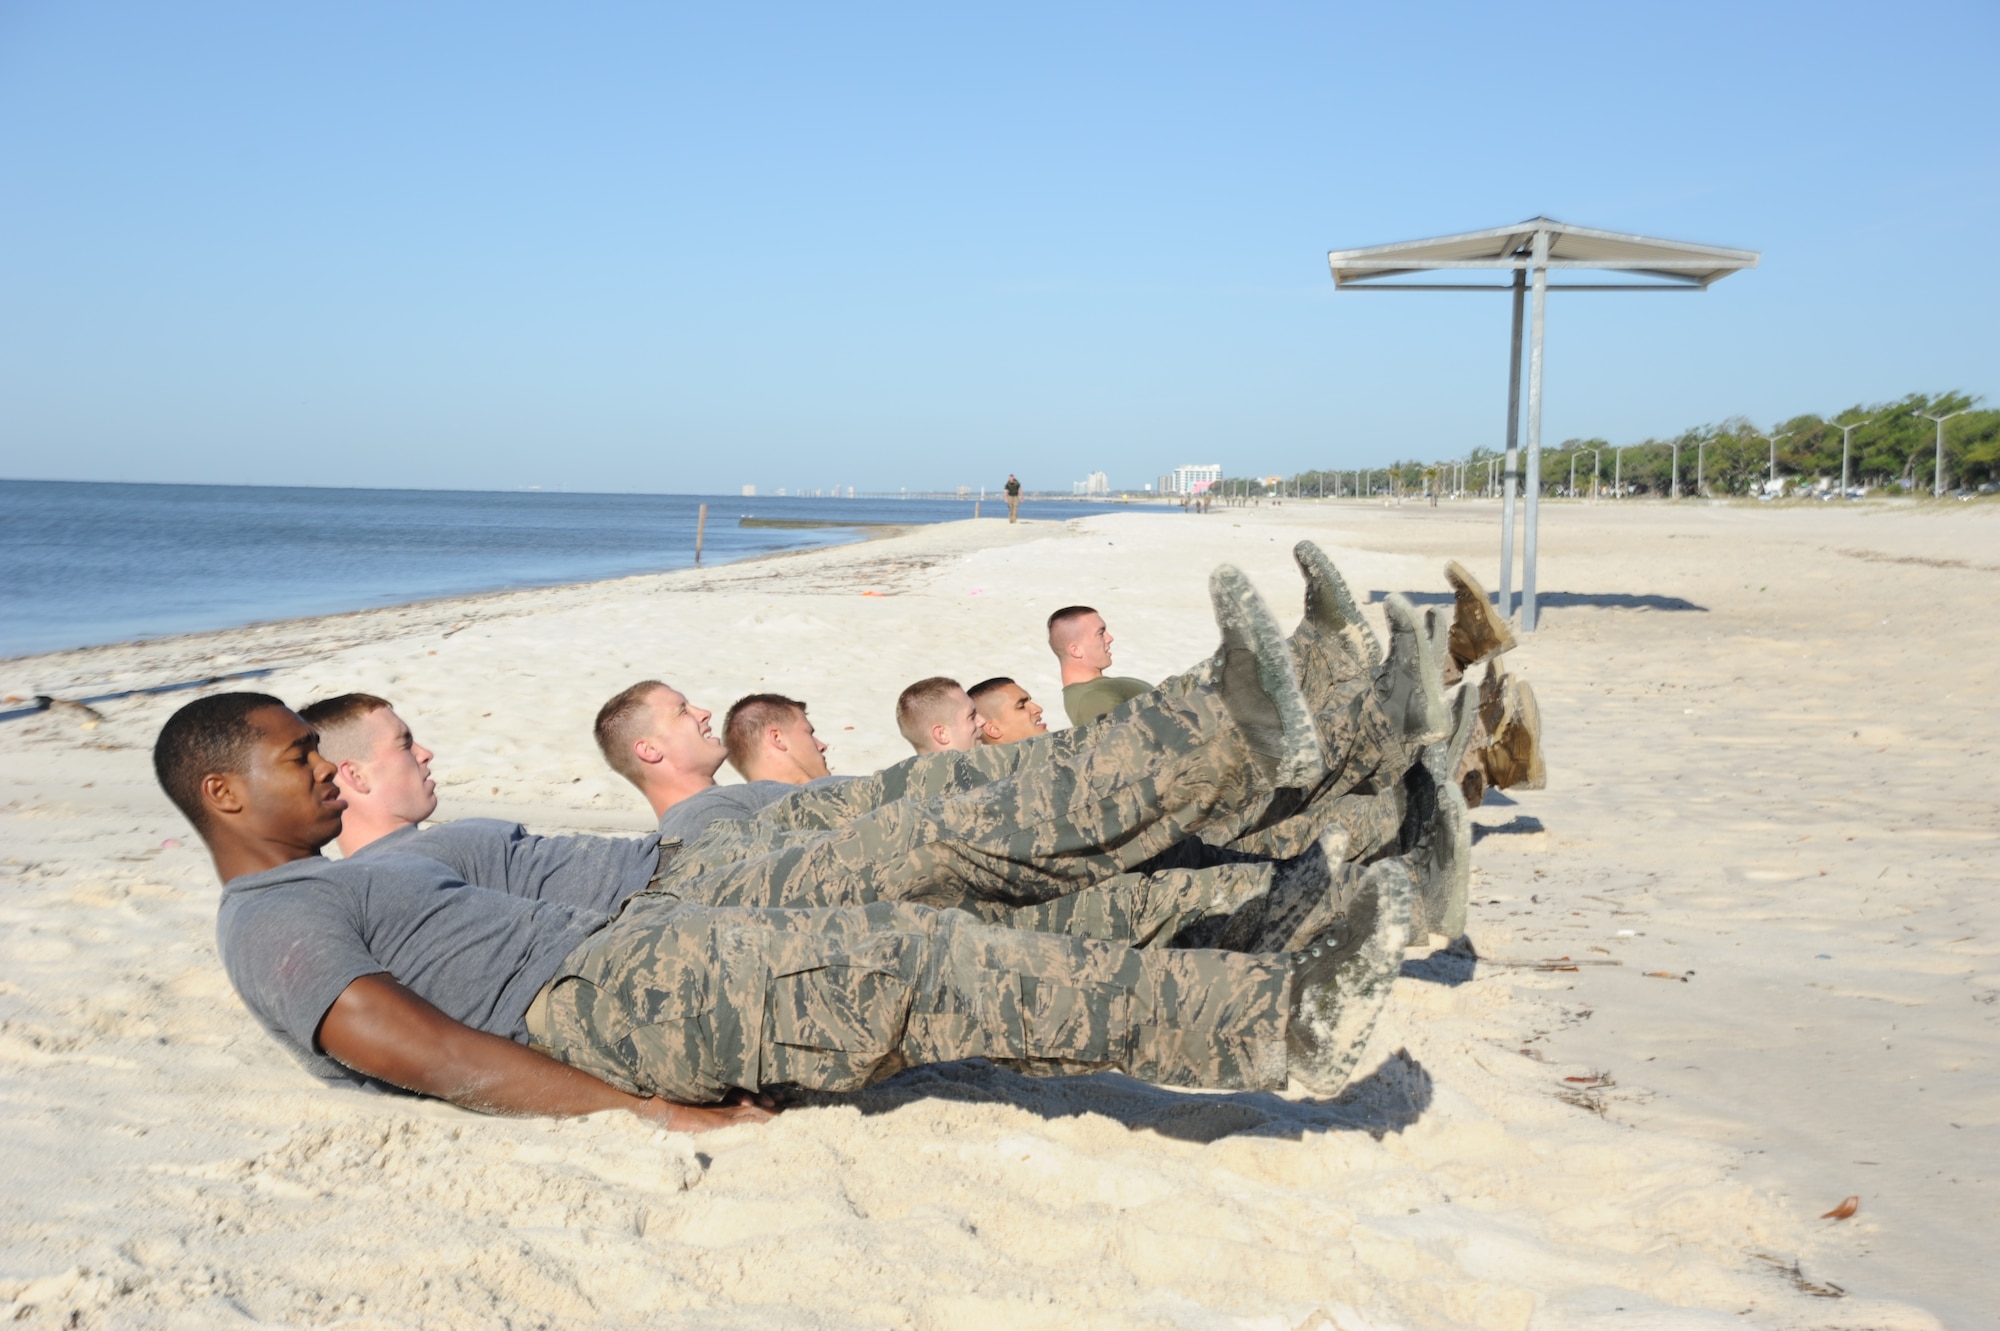 Combat control trainees from the 334th Training Squadron do 100 four-count flutter kicks during a physical training session April 12, 2013, on Biloxi beach.  Combat controllers are ground troops who are embedded with special forces teams and provide close-air support for special forces units. While at Keesler, trainees learn how to run, swim, carry a rucksack and conduct air traffic control. These Airmen are prepared physically and mentally for the demands of the combat controller pipeline while earning air traffic control certification in just 15 weeks.  (U.S. Air Force photo by 2nd Lt. Michael Alvarez)